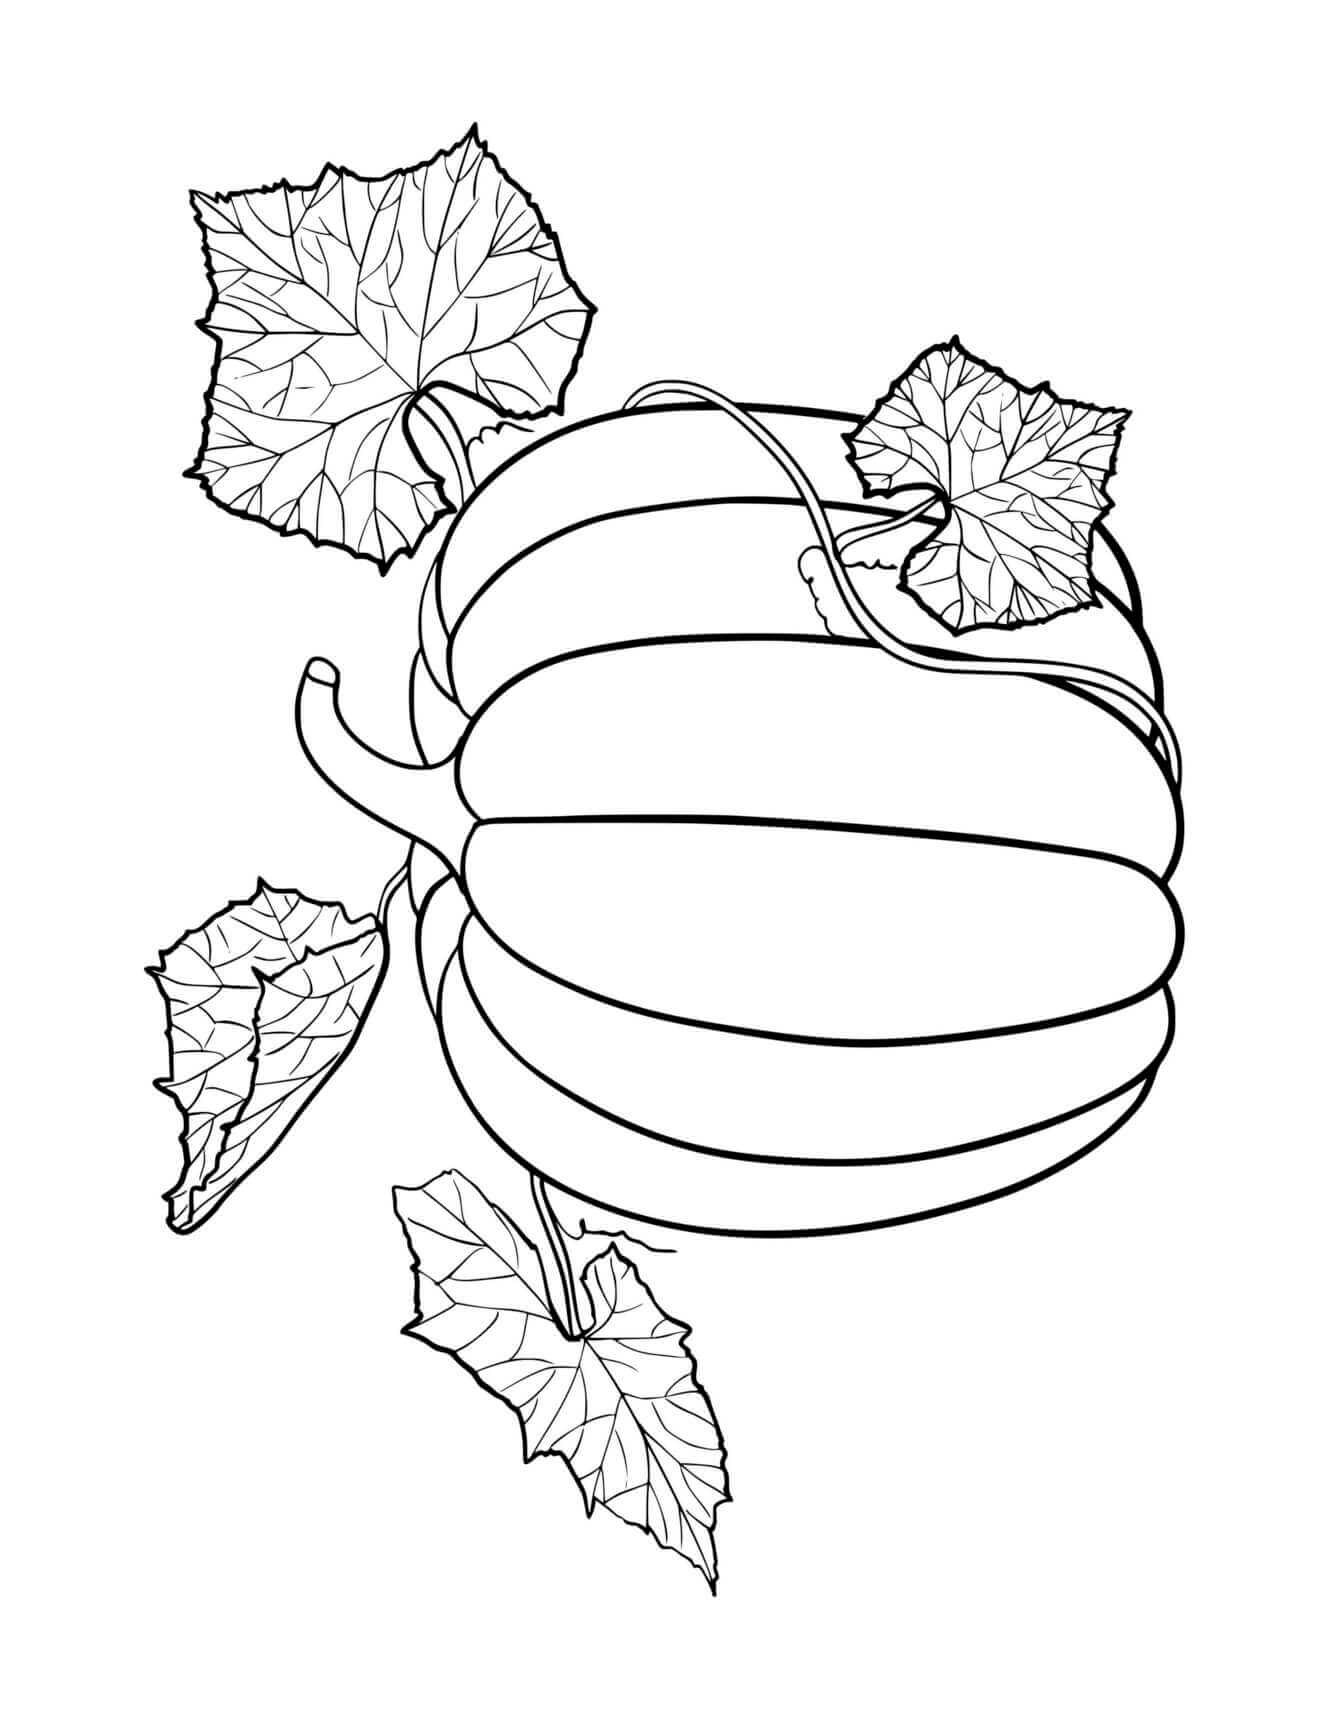 Fall Pumpkin Patterned Vine Leaves Coloring Page